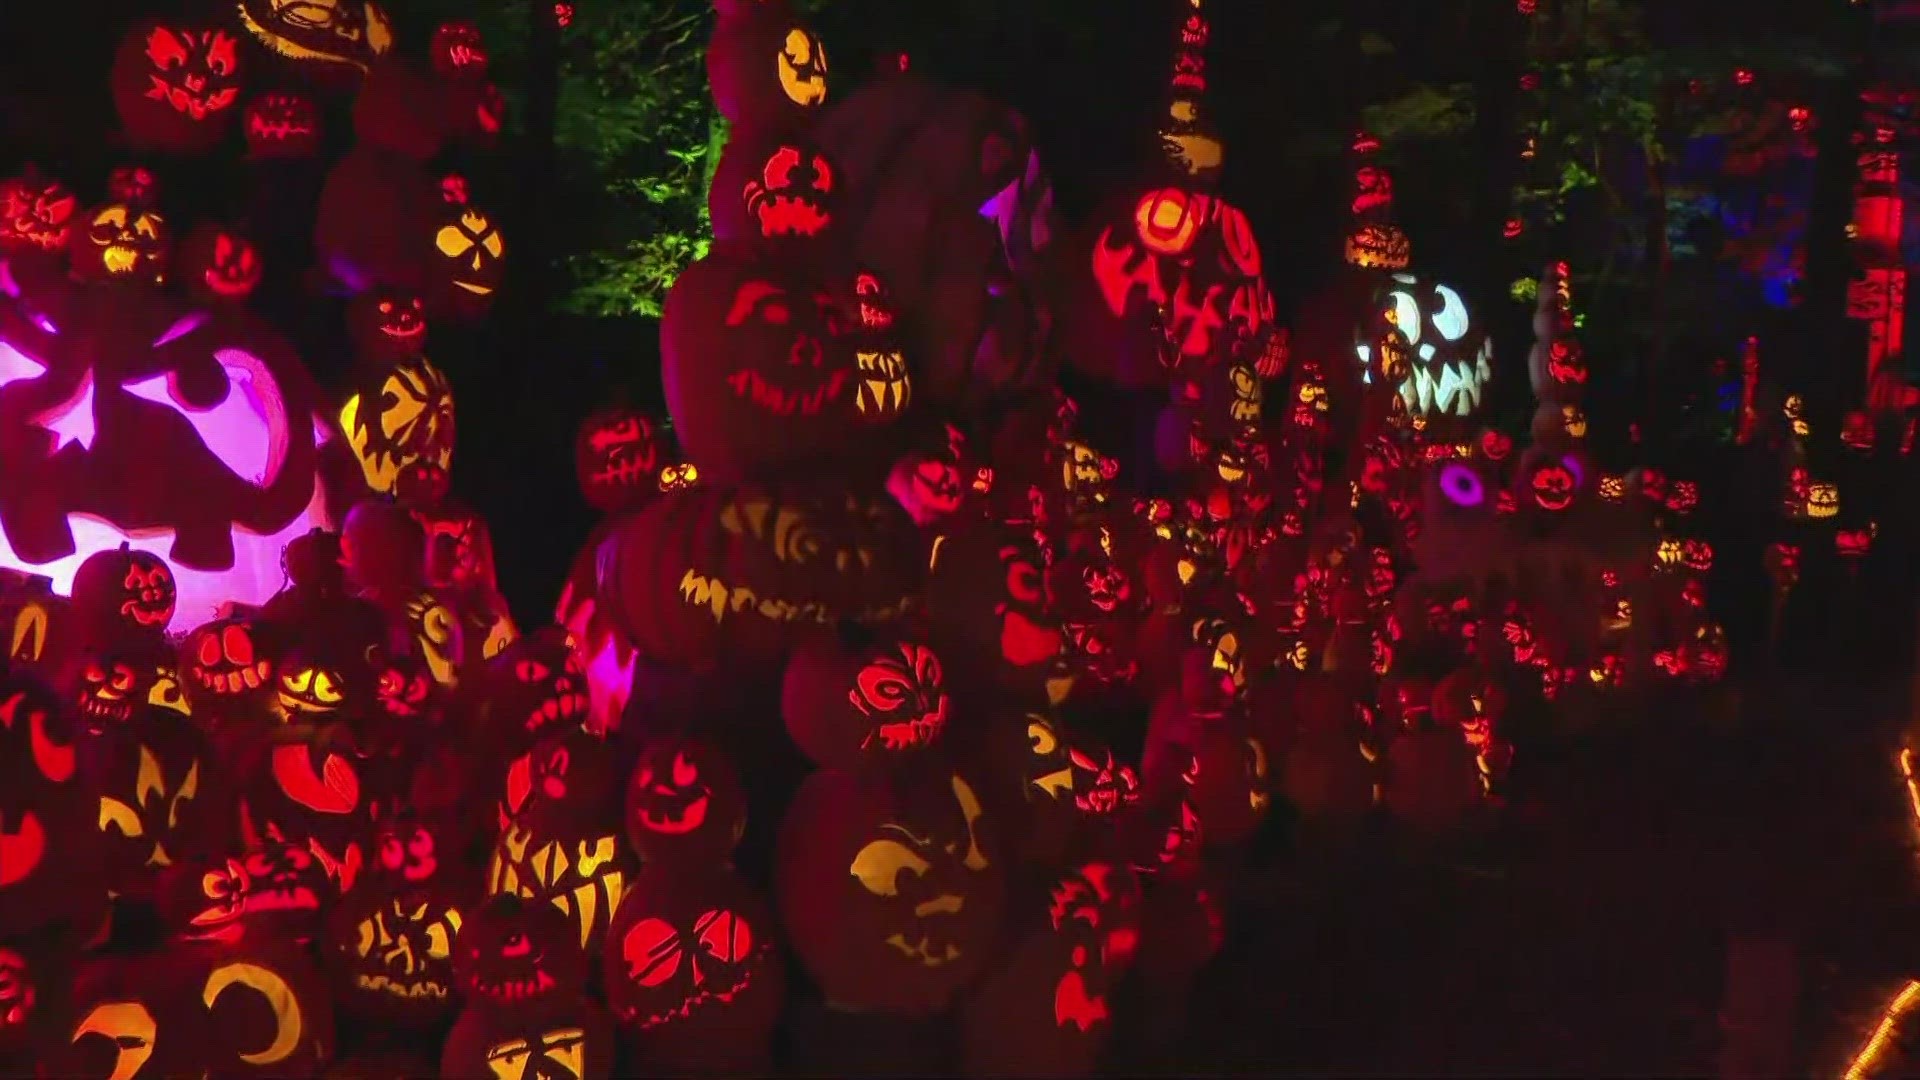 Families can enjoy seeing intricately-carved pumpkins at the Jack O'Lantern Spectacular at Iroquois Park from Oct. 3 to 31.